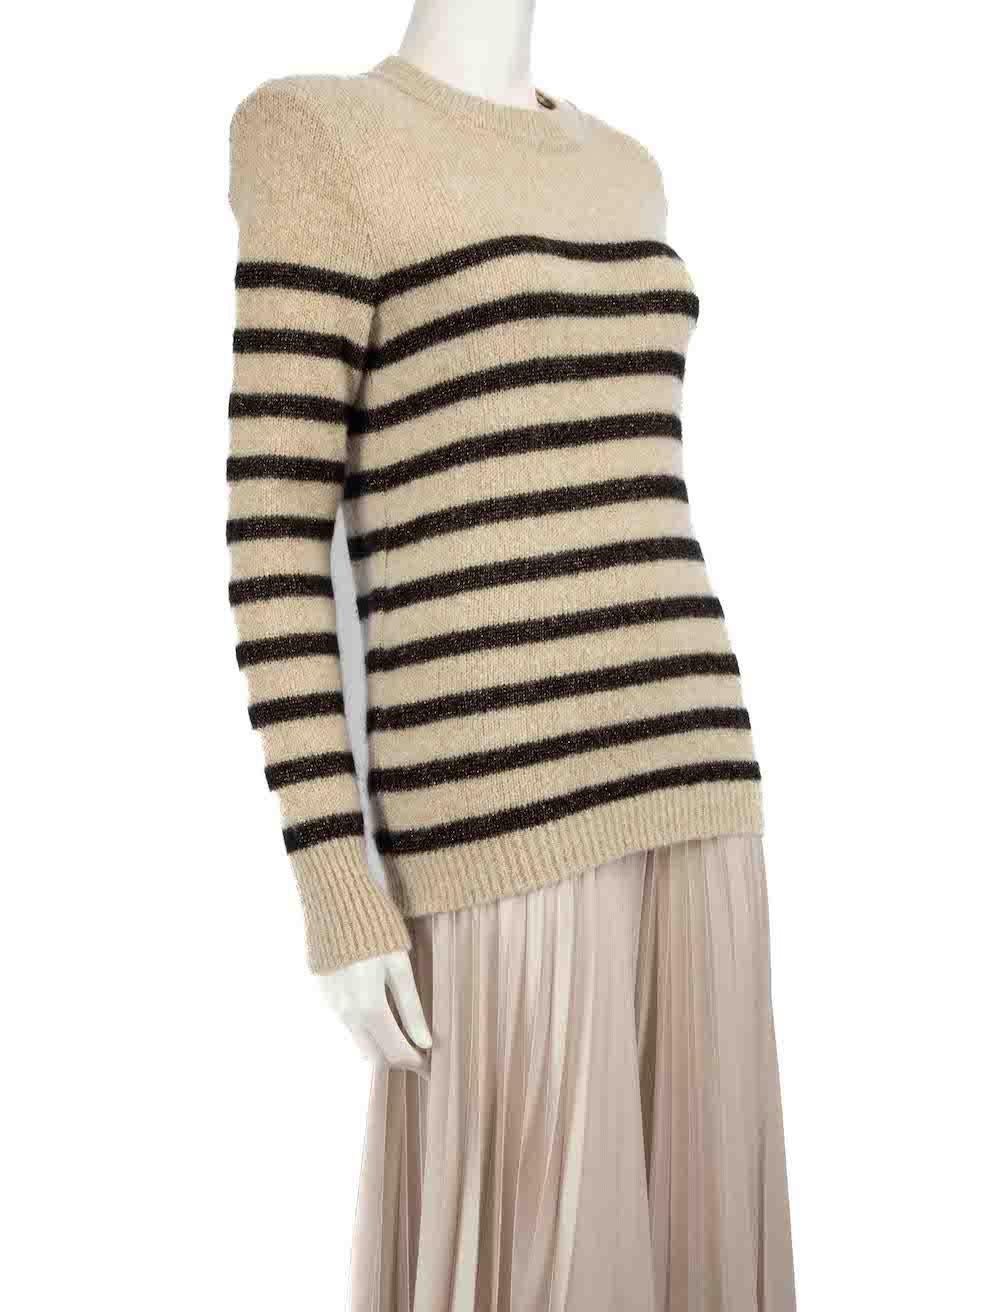 CONDITION is Very good. Hardly any visible wear to jumper is evident on this used Balmain designer resale item.
 
 
 
 Details
 
 
 Beige
 
 Wool
 
 Long sleeves jumper
 
 Round neckline
 
 Striped pattern
 
 Glitter accent
 
 Gold tone logo snap